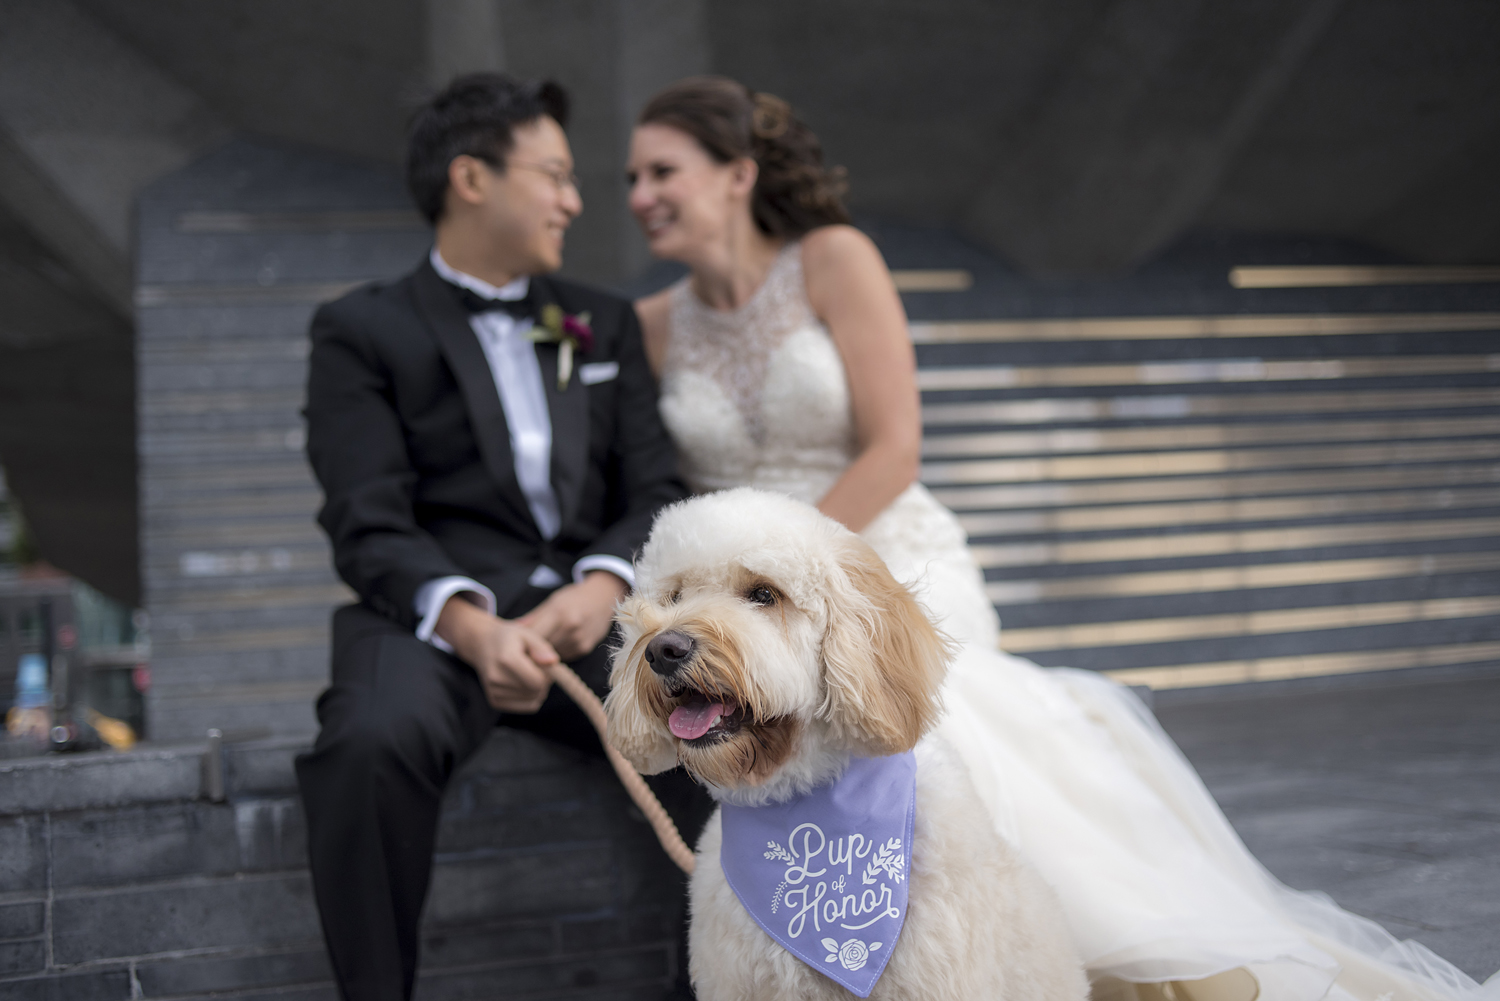 Portrait of bride and groom and their dog on wedding day in NYC